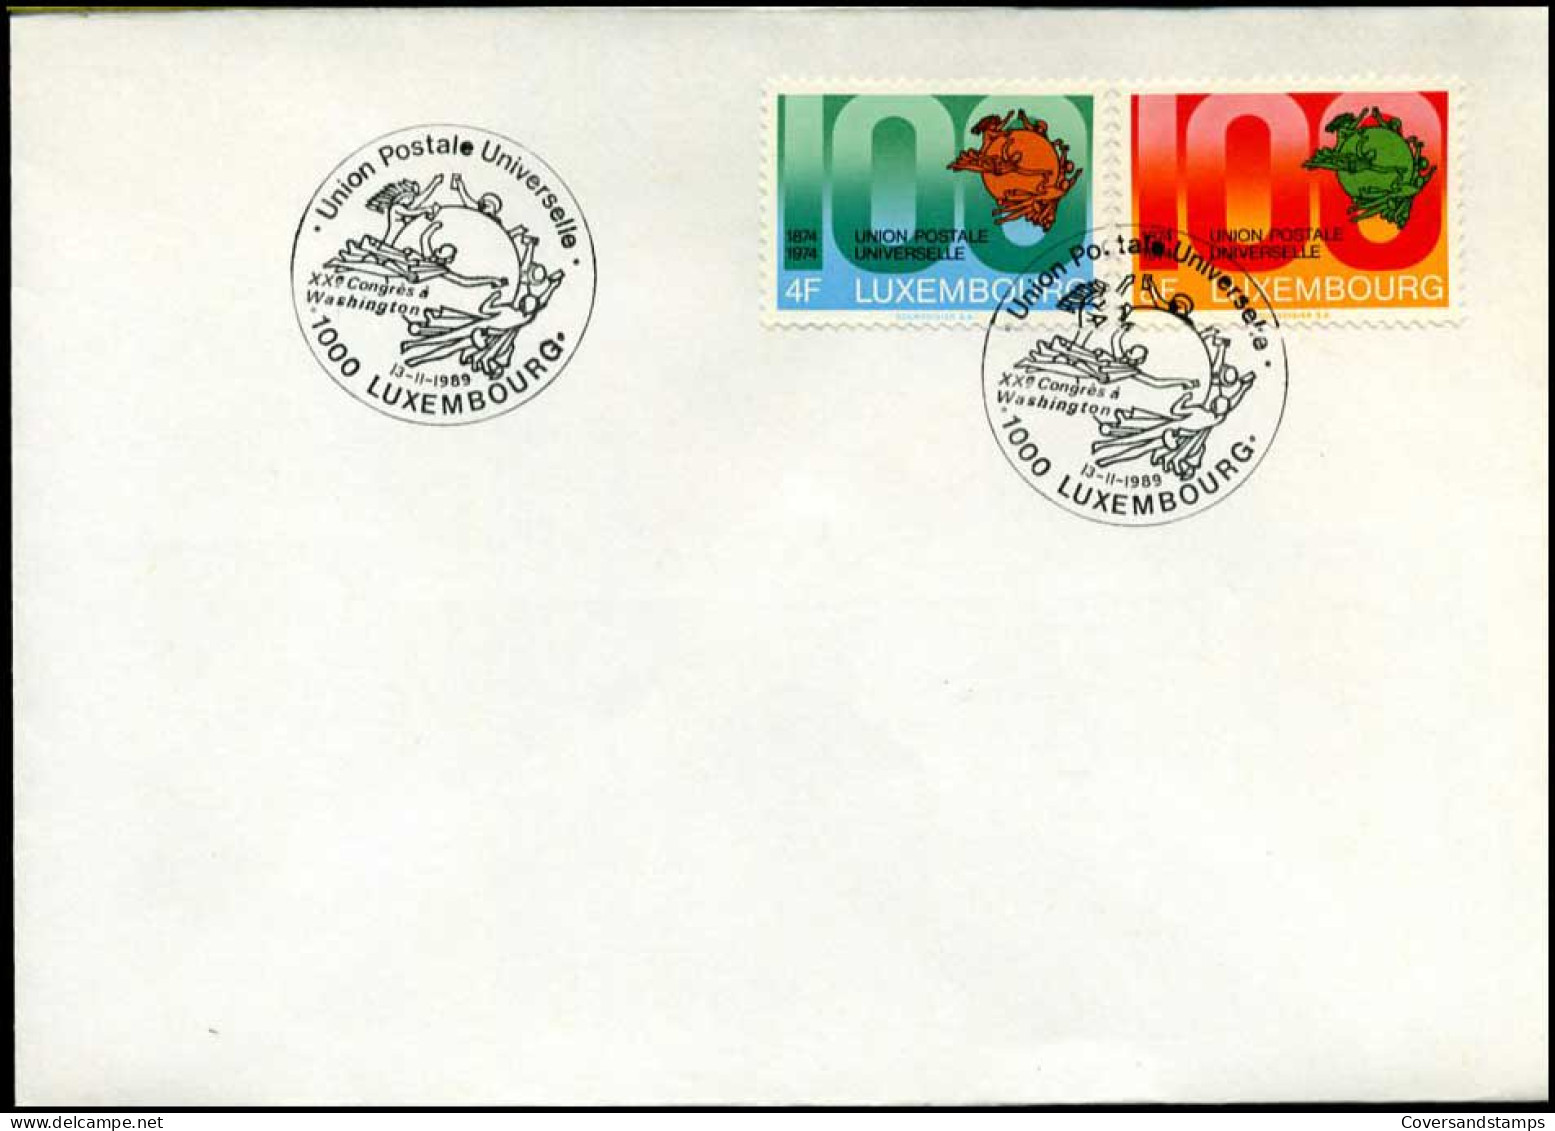 Luxembourg - FDC - Union Postale Universelle - FDC